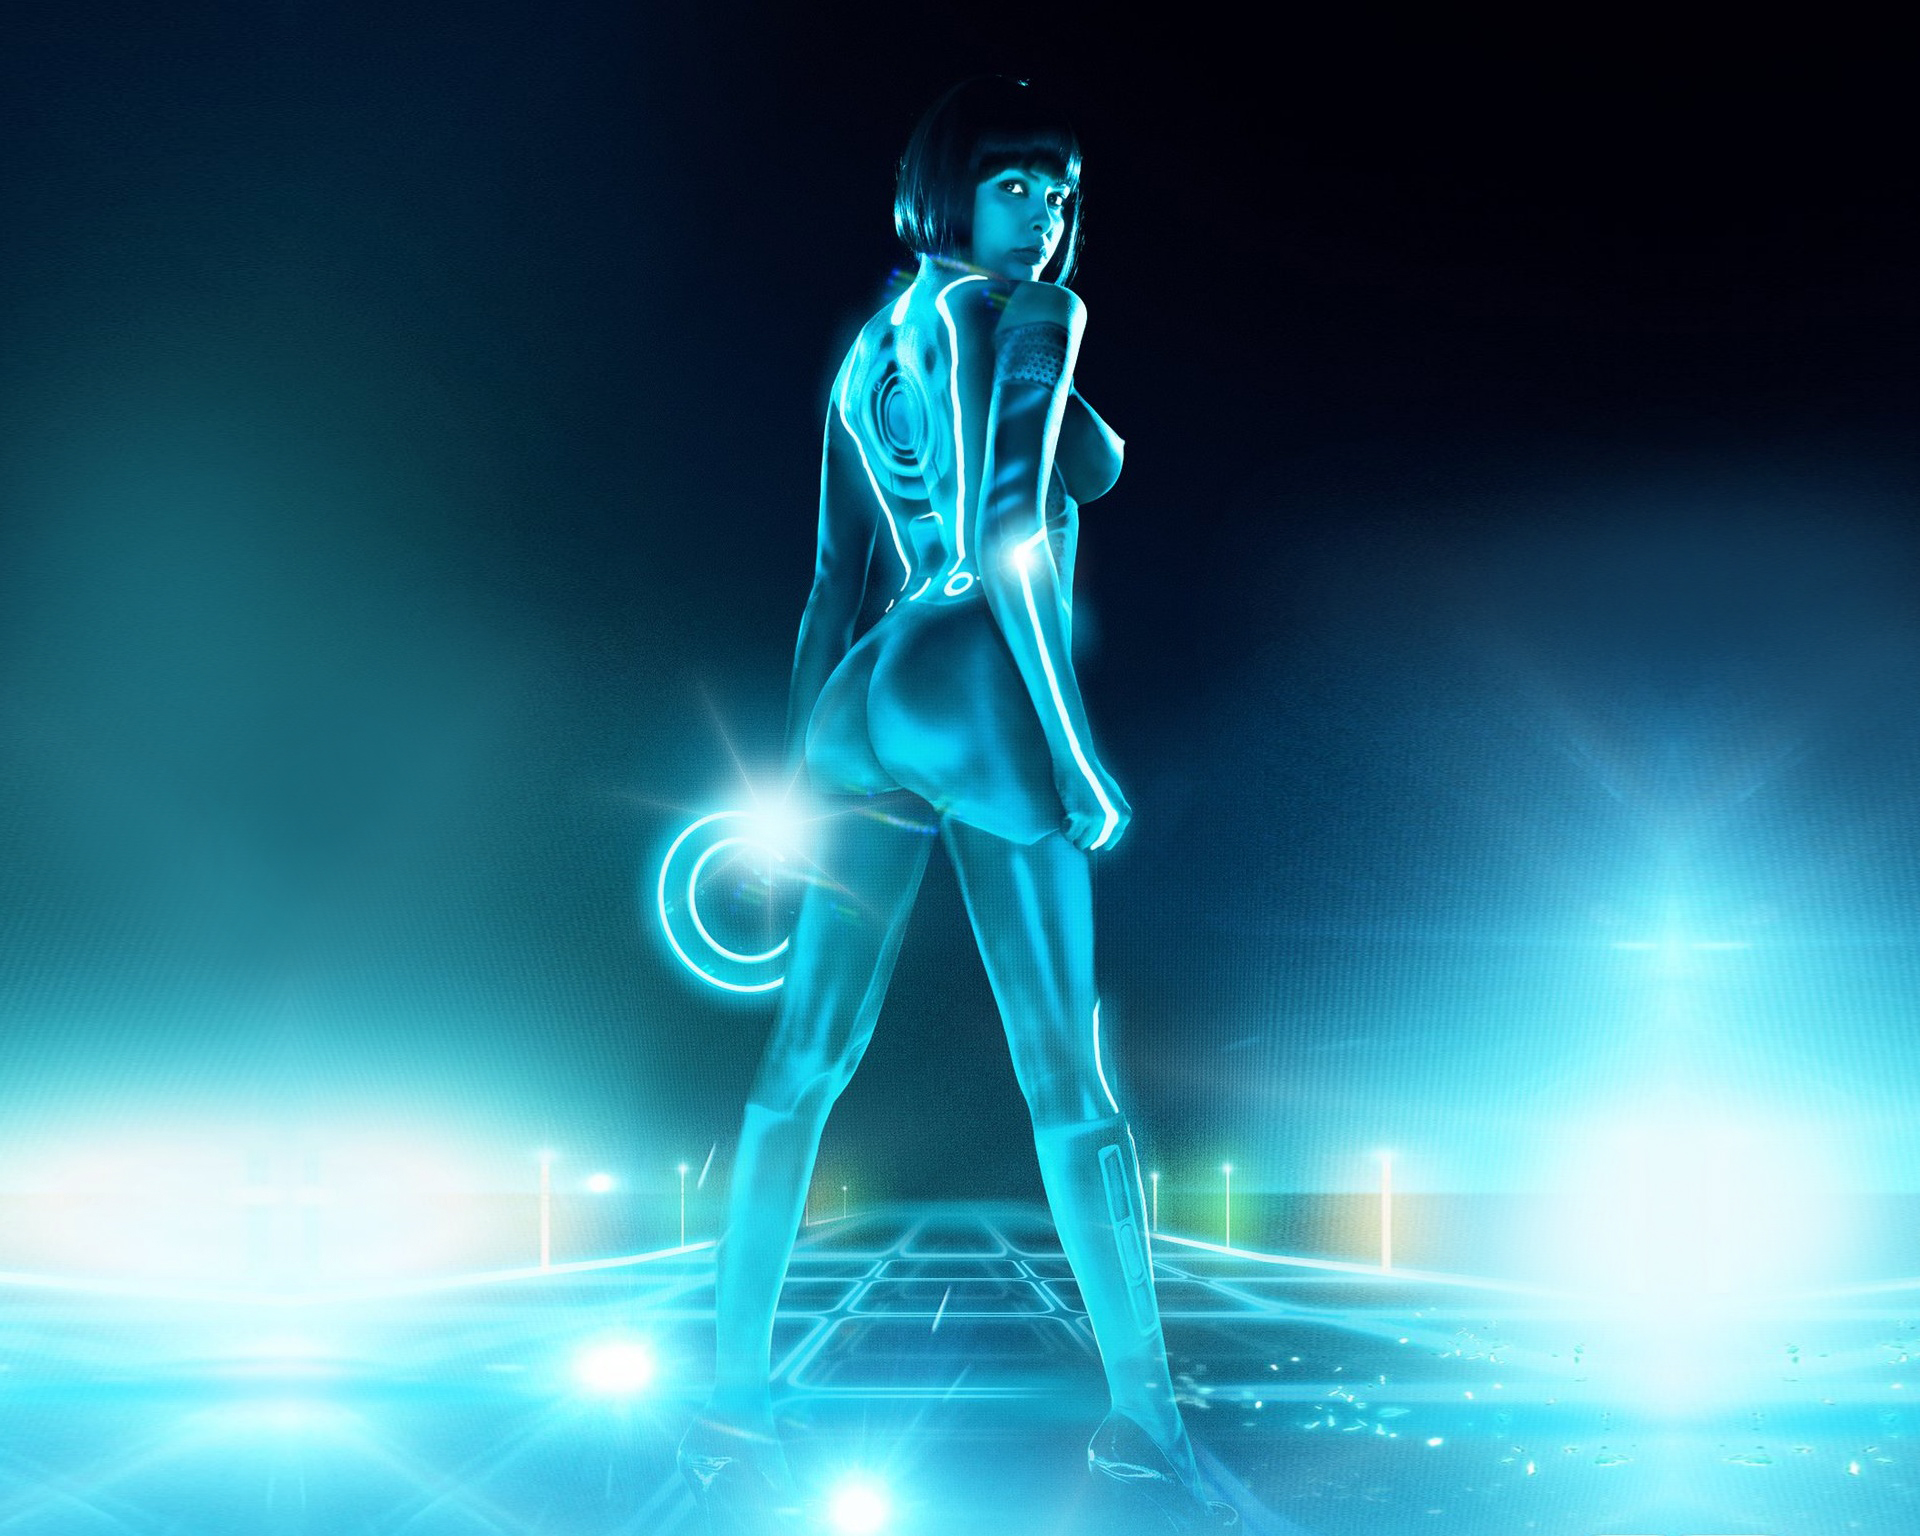 tron wallpaper,blue,joint,water,lens flare,animation